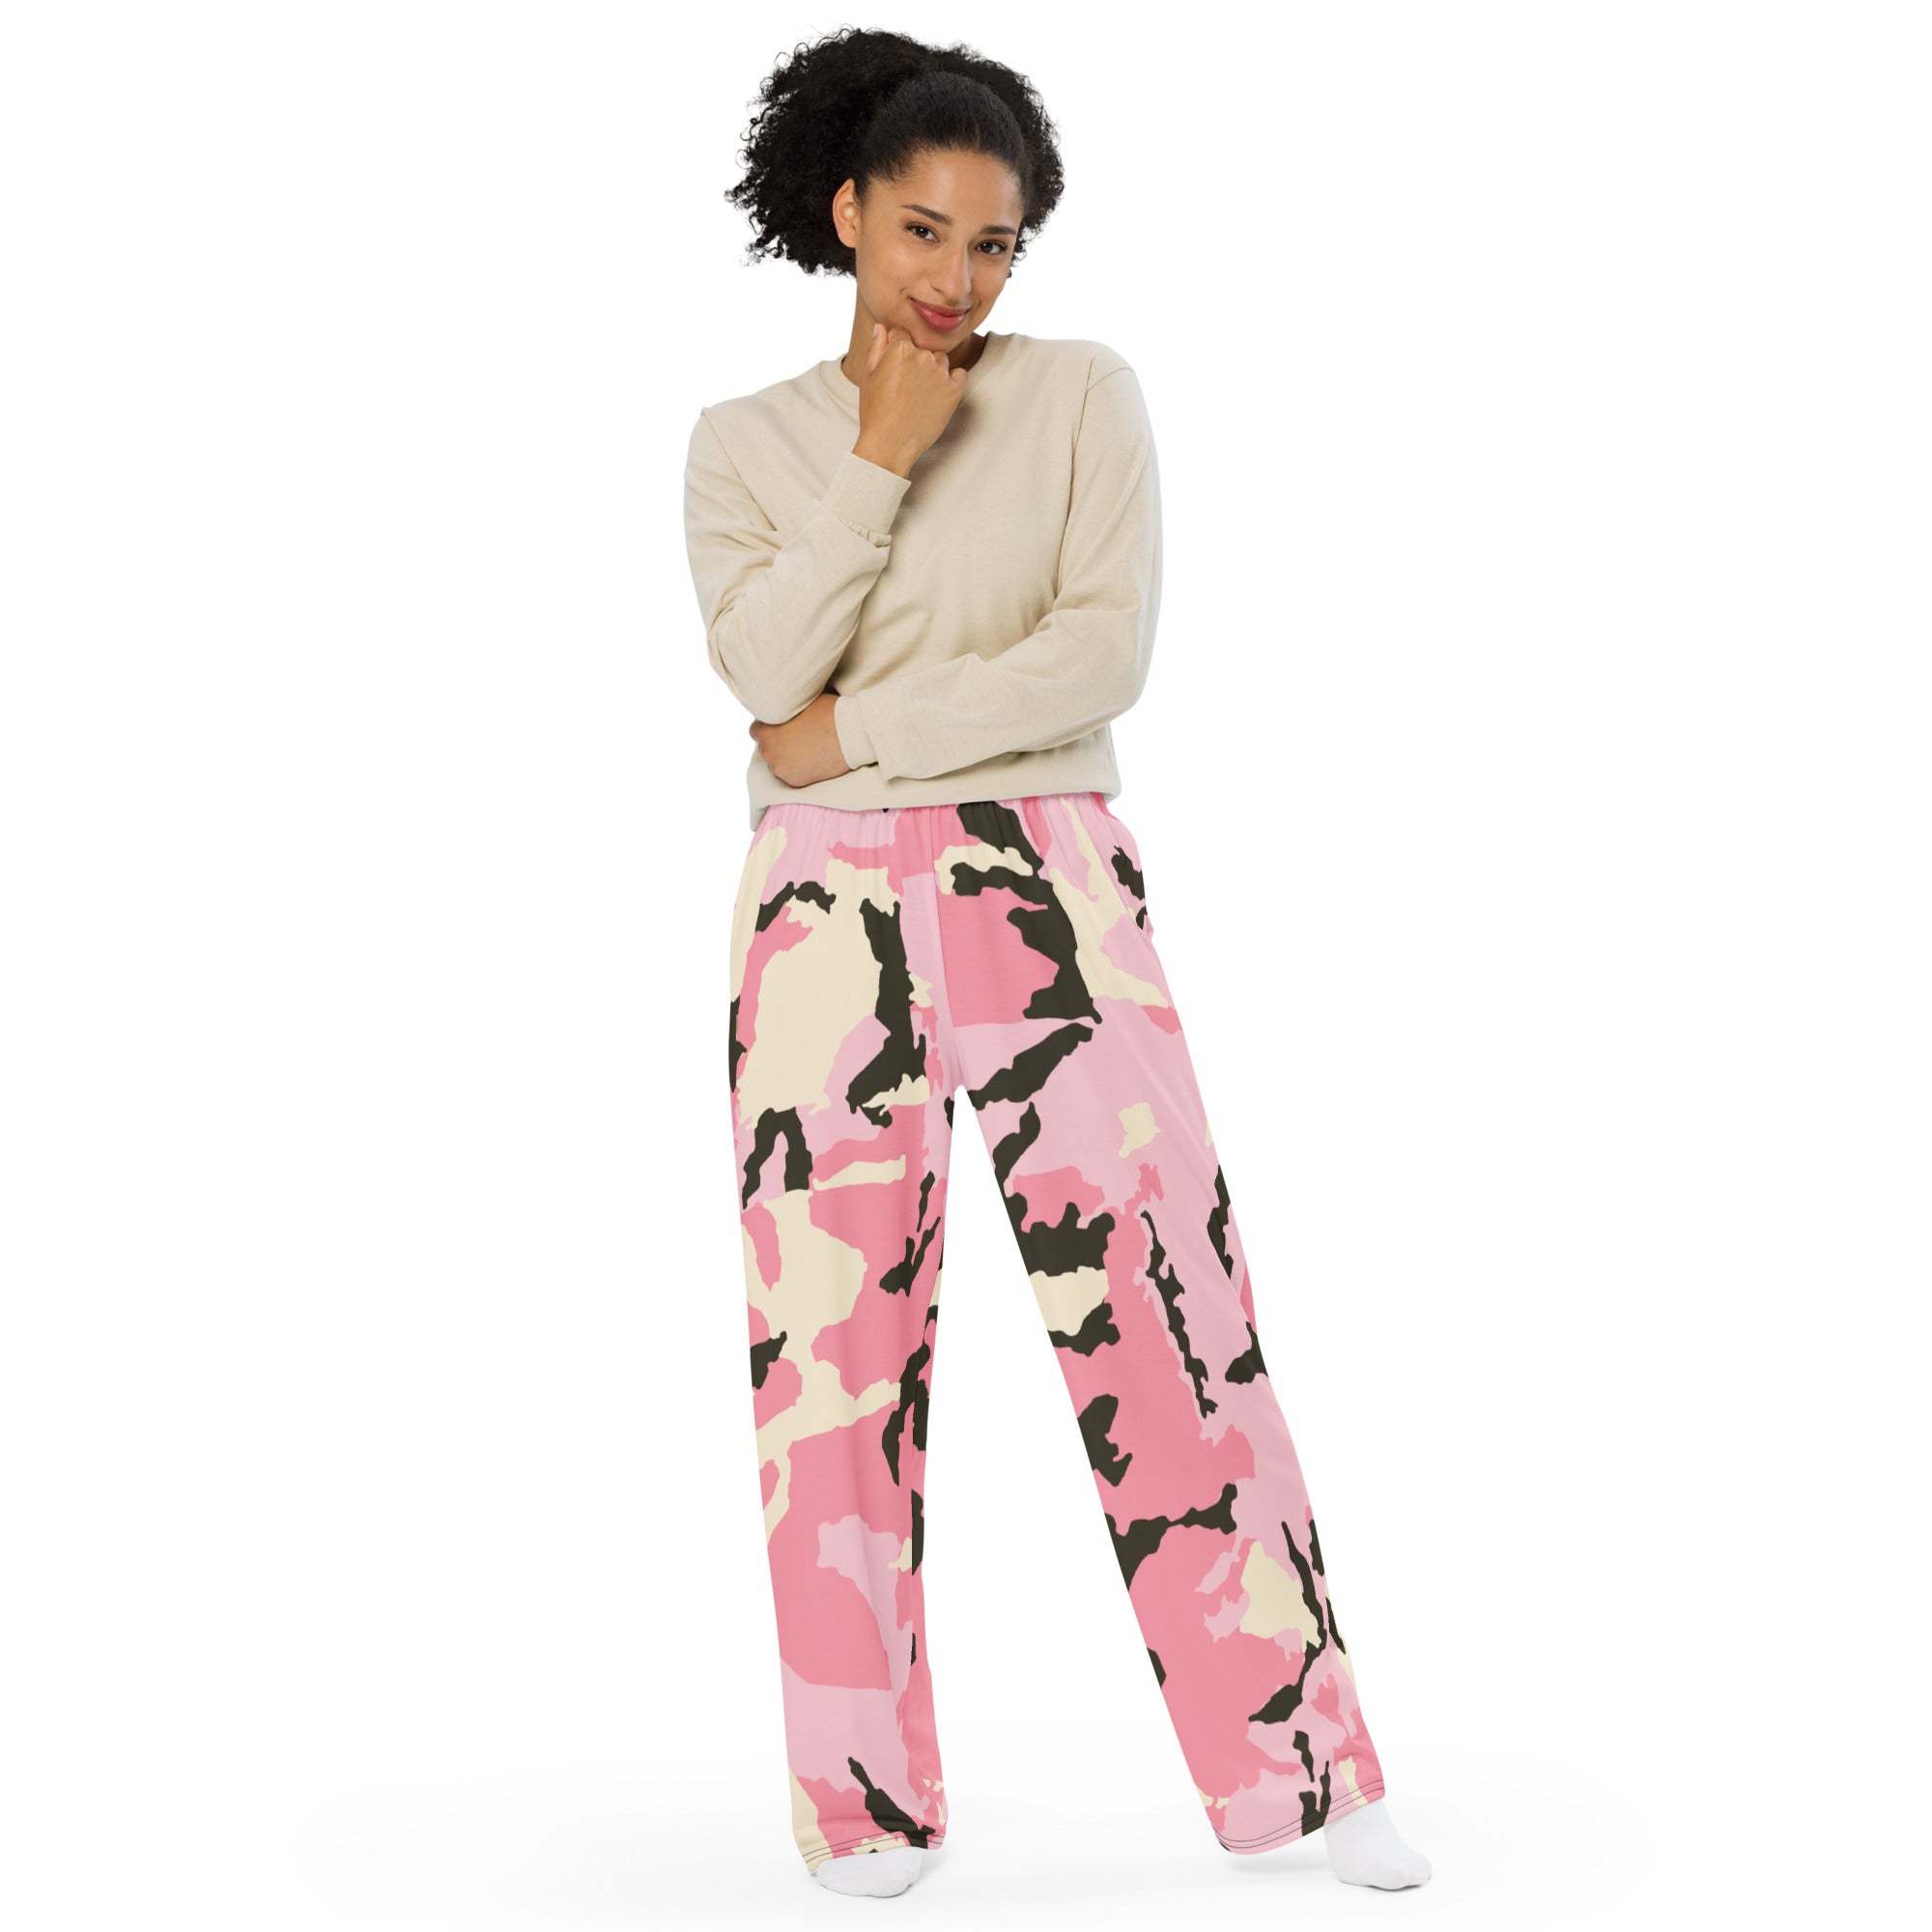 All-over print unisex wide-leg pants, Pink Military Pants, Fun, Relaxing, Gym